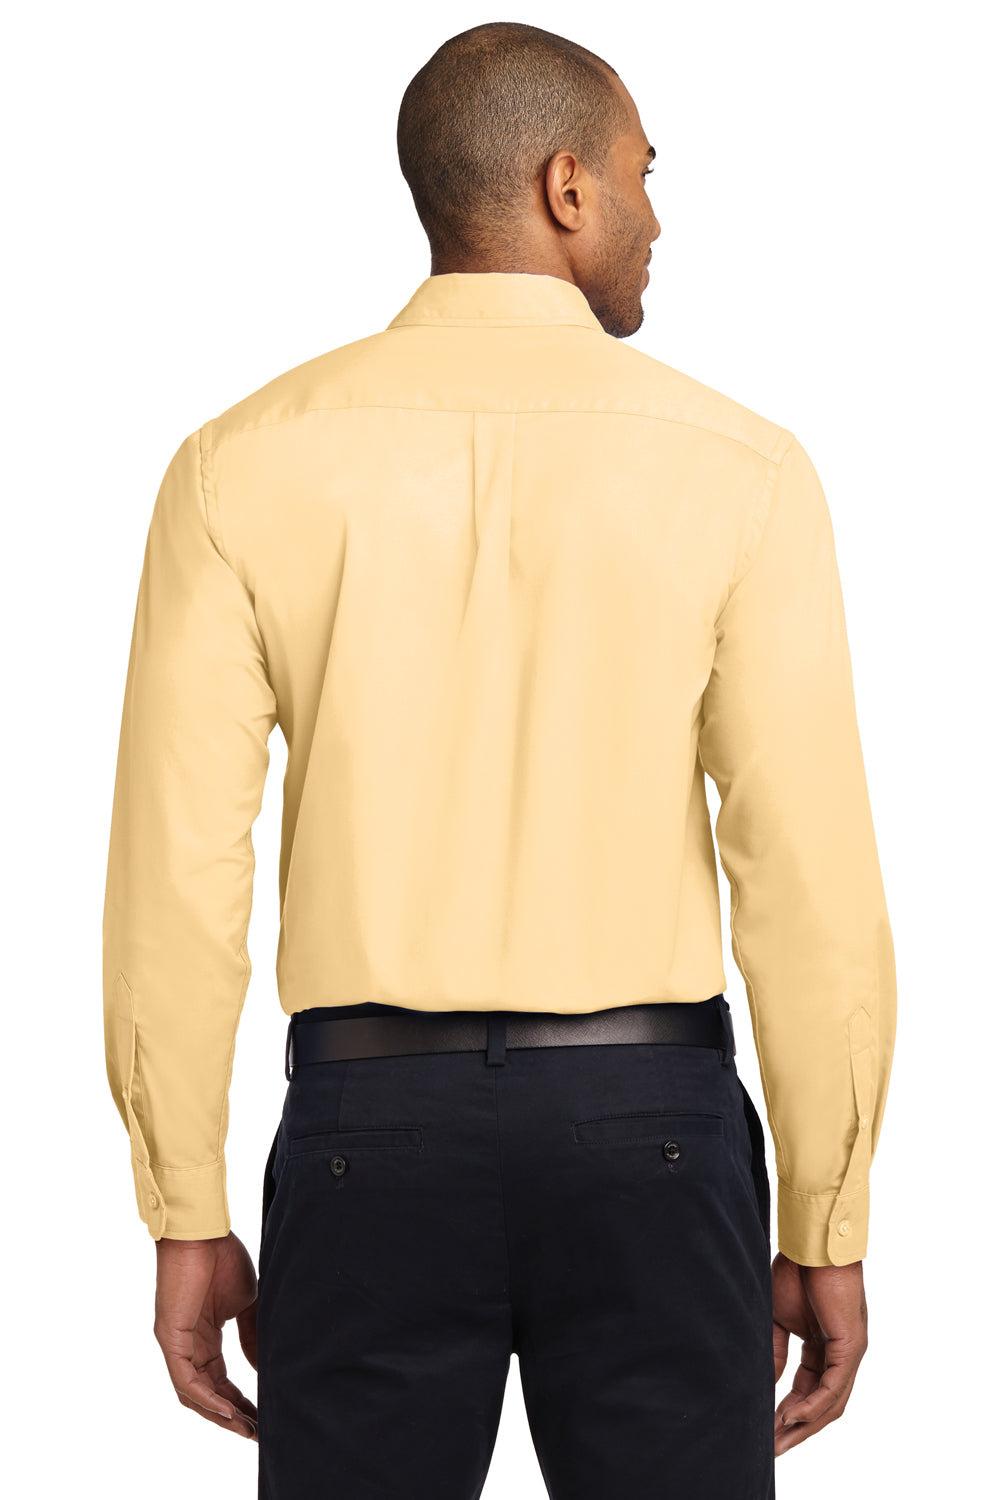 Port Authority S608/TLS608/S608ES Mens Easy Care Wrinkle Resistant Long Sleeve Button Down Shirt w/ Pocket Yellow Back